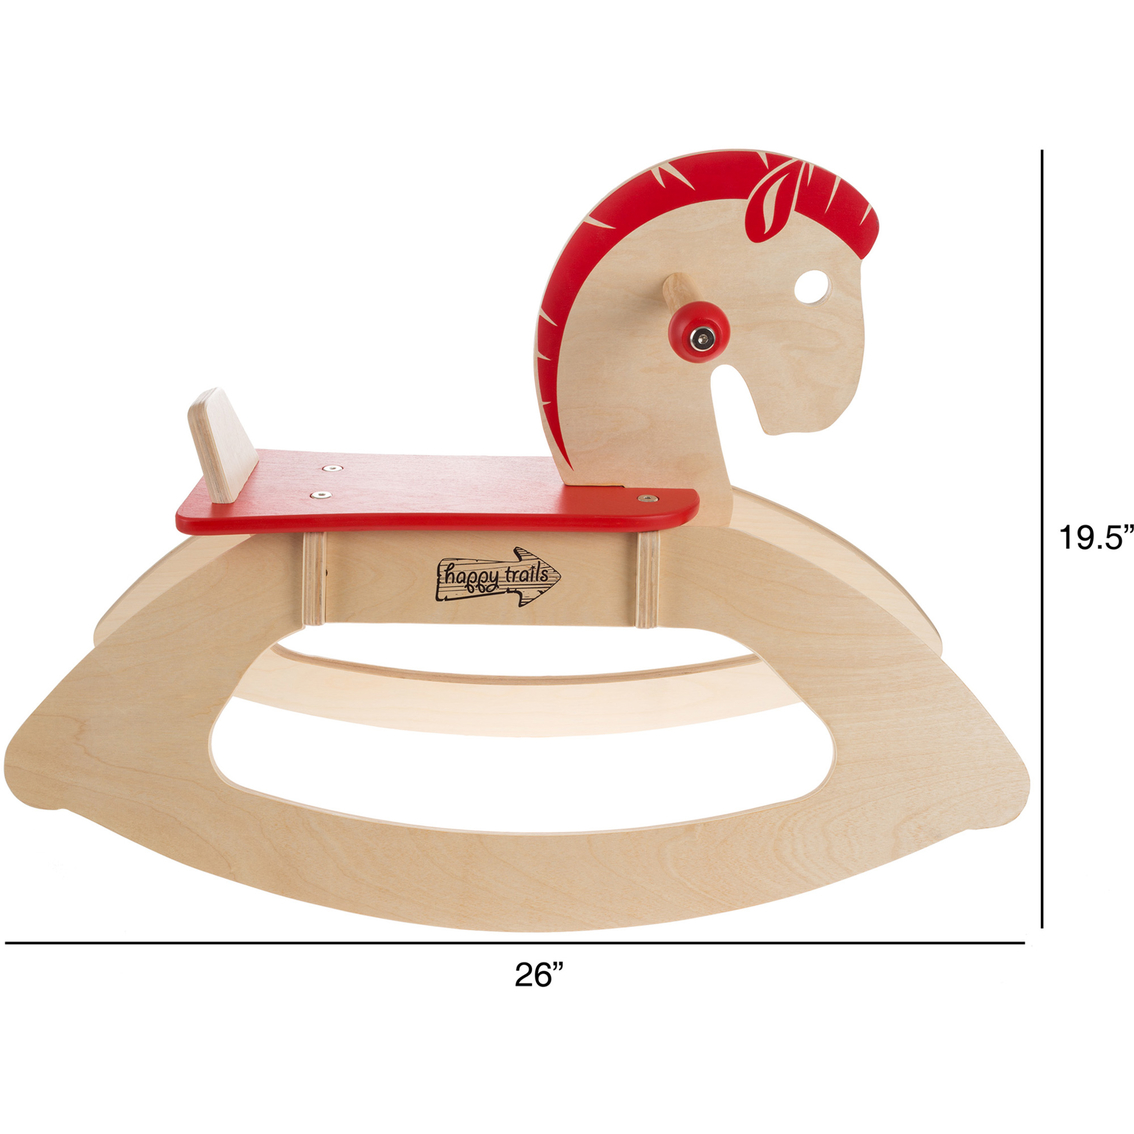 Happy Trails Wooden Rocking Horse - Image 2 of 6